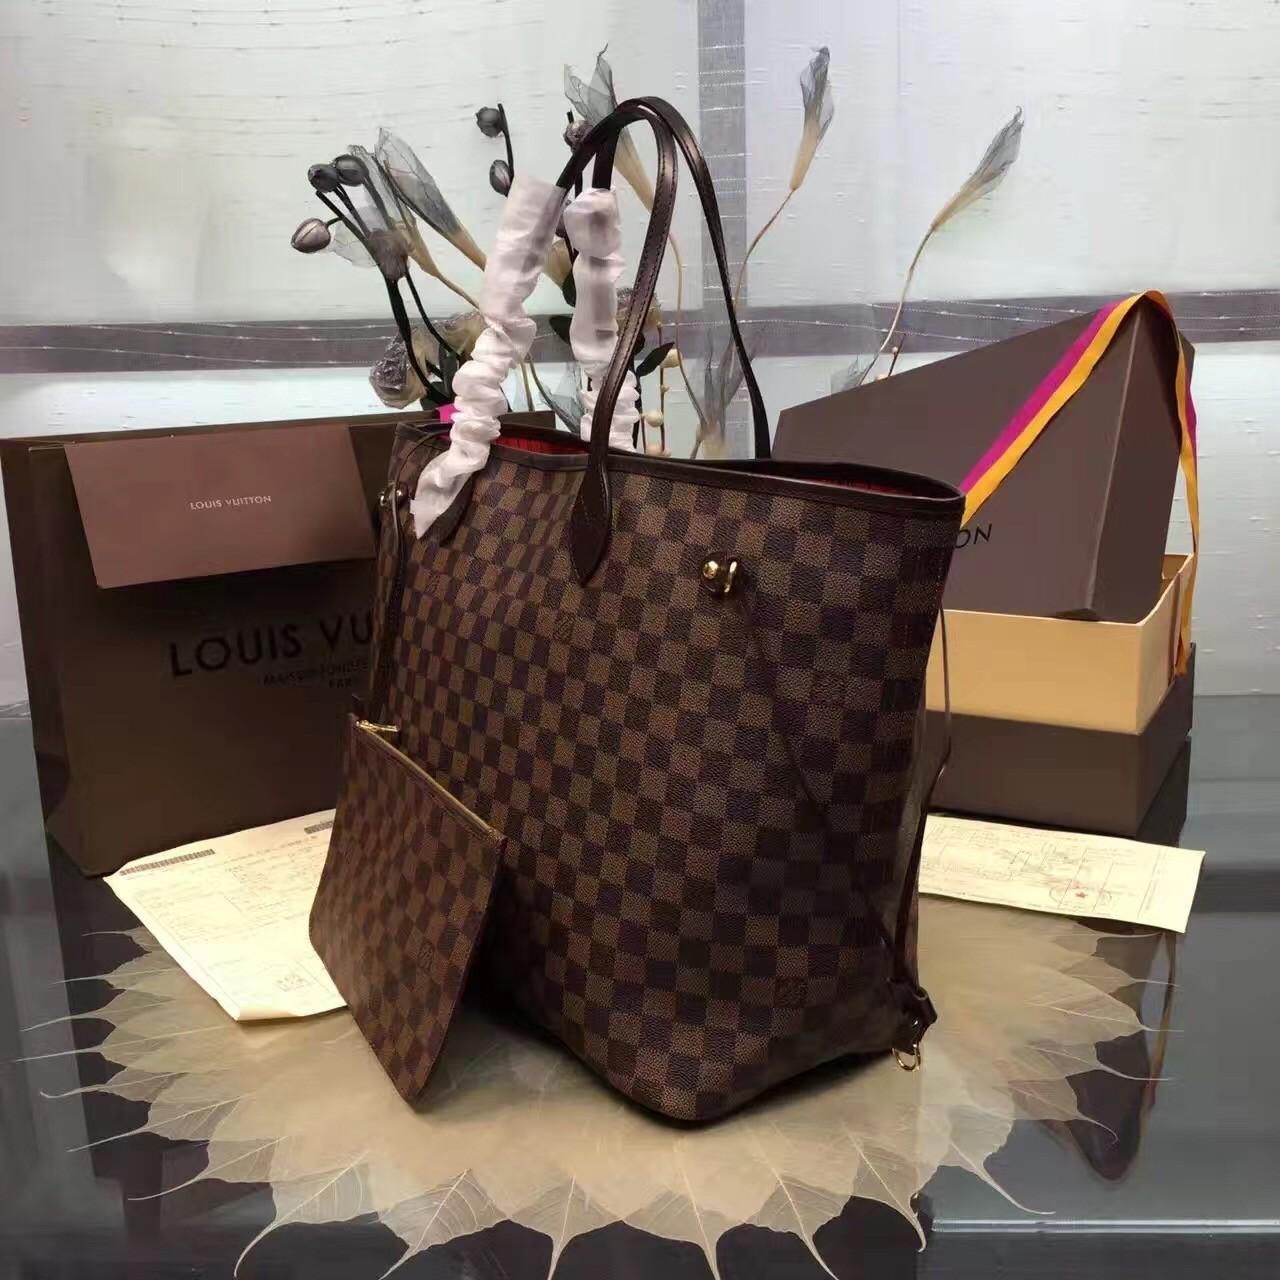 How To Identify Original Louis Vuitton Bags - 5Chat